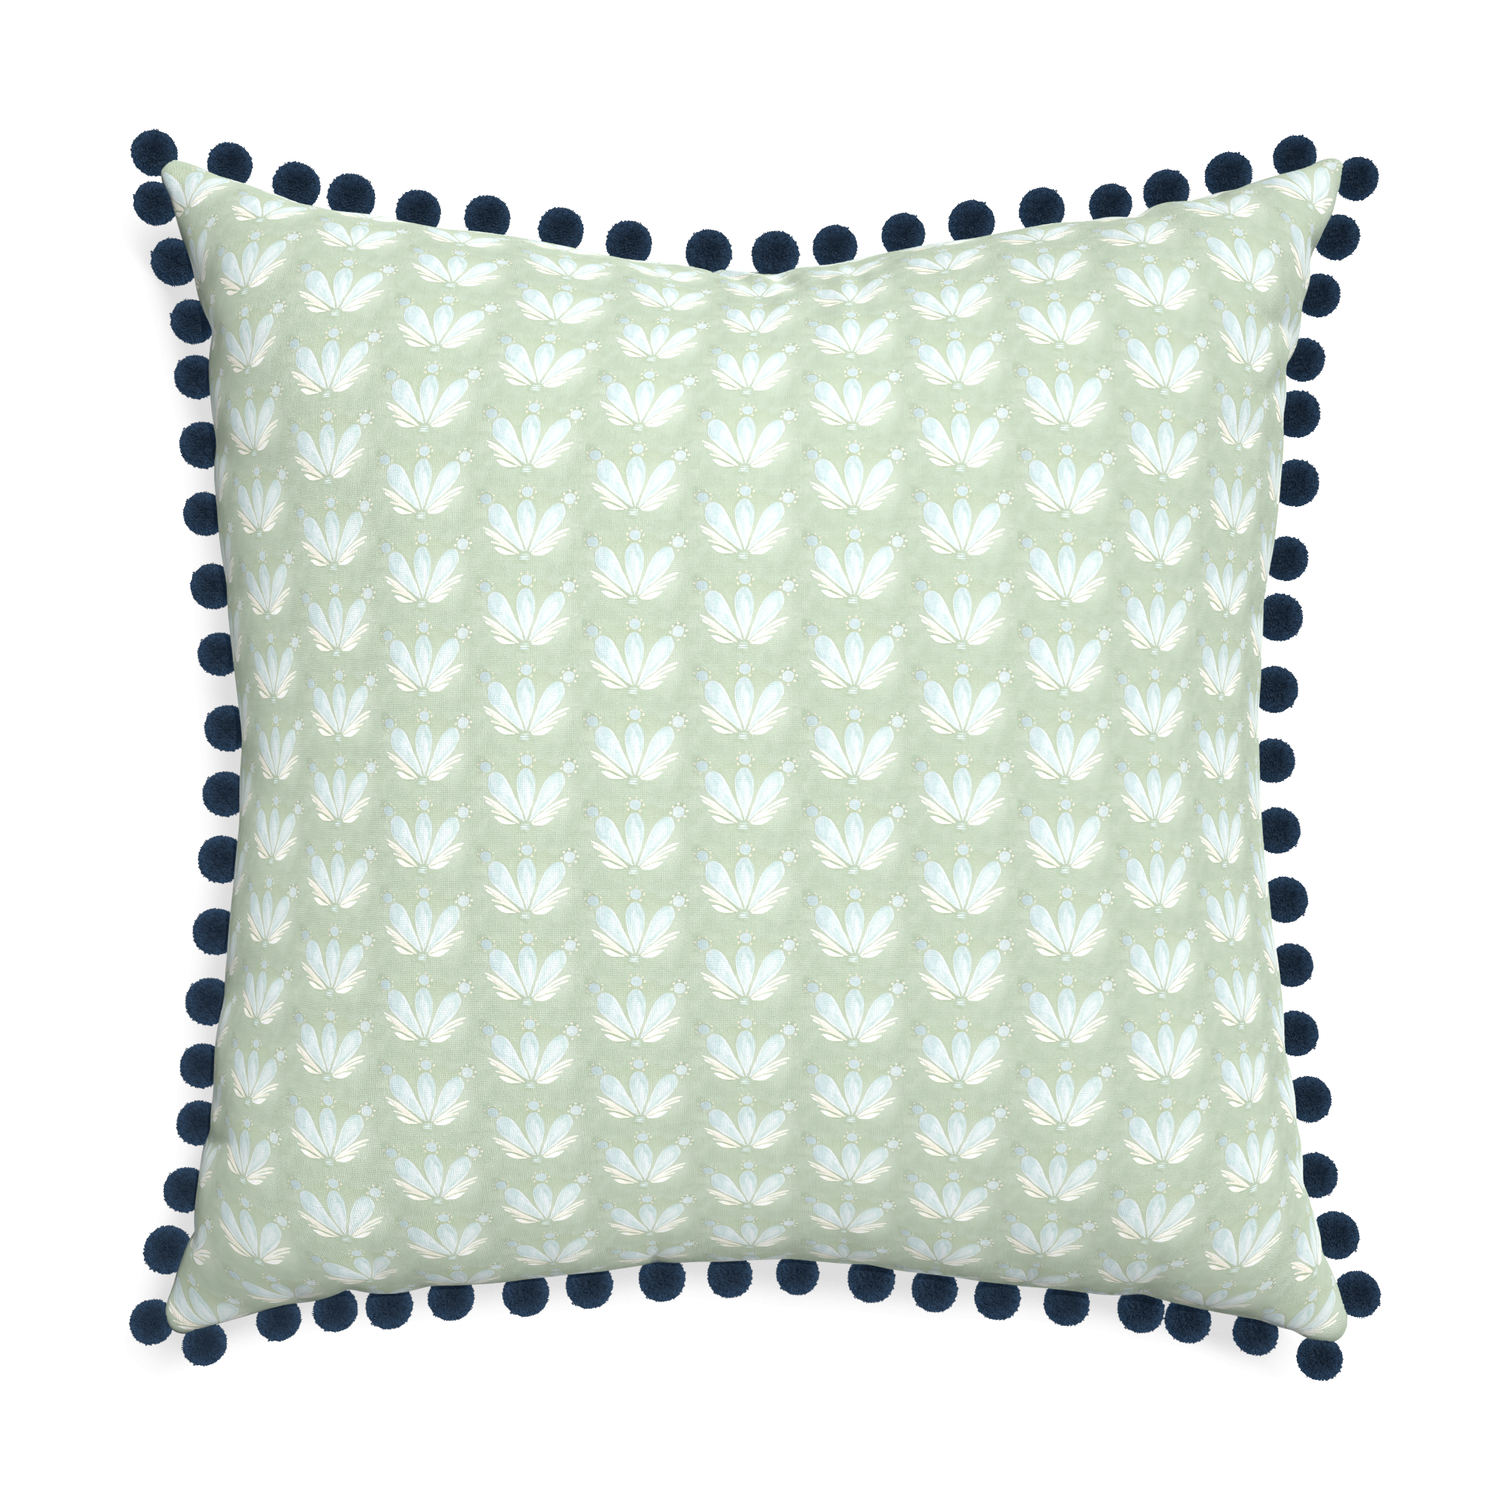 Euro-sham serena sea salt custom blue & green floral drop repeatpillow with c on white background